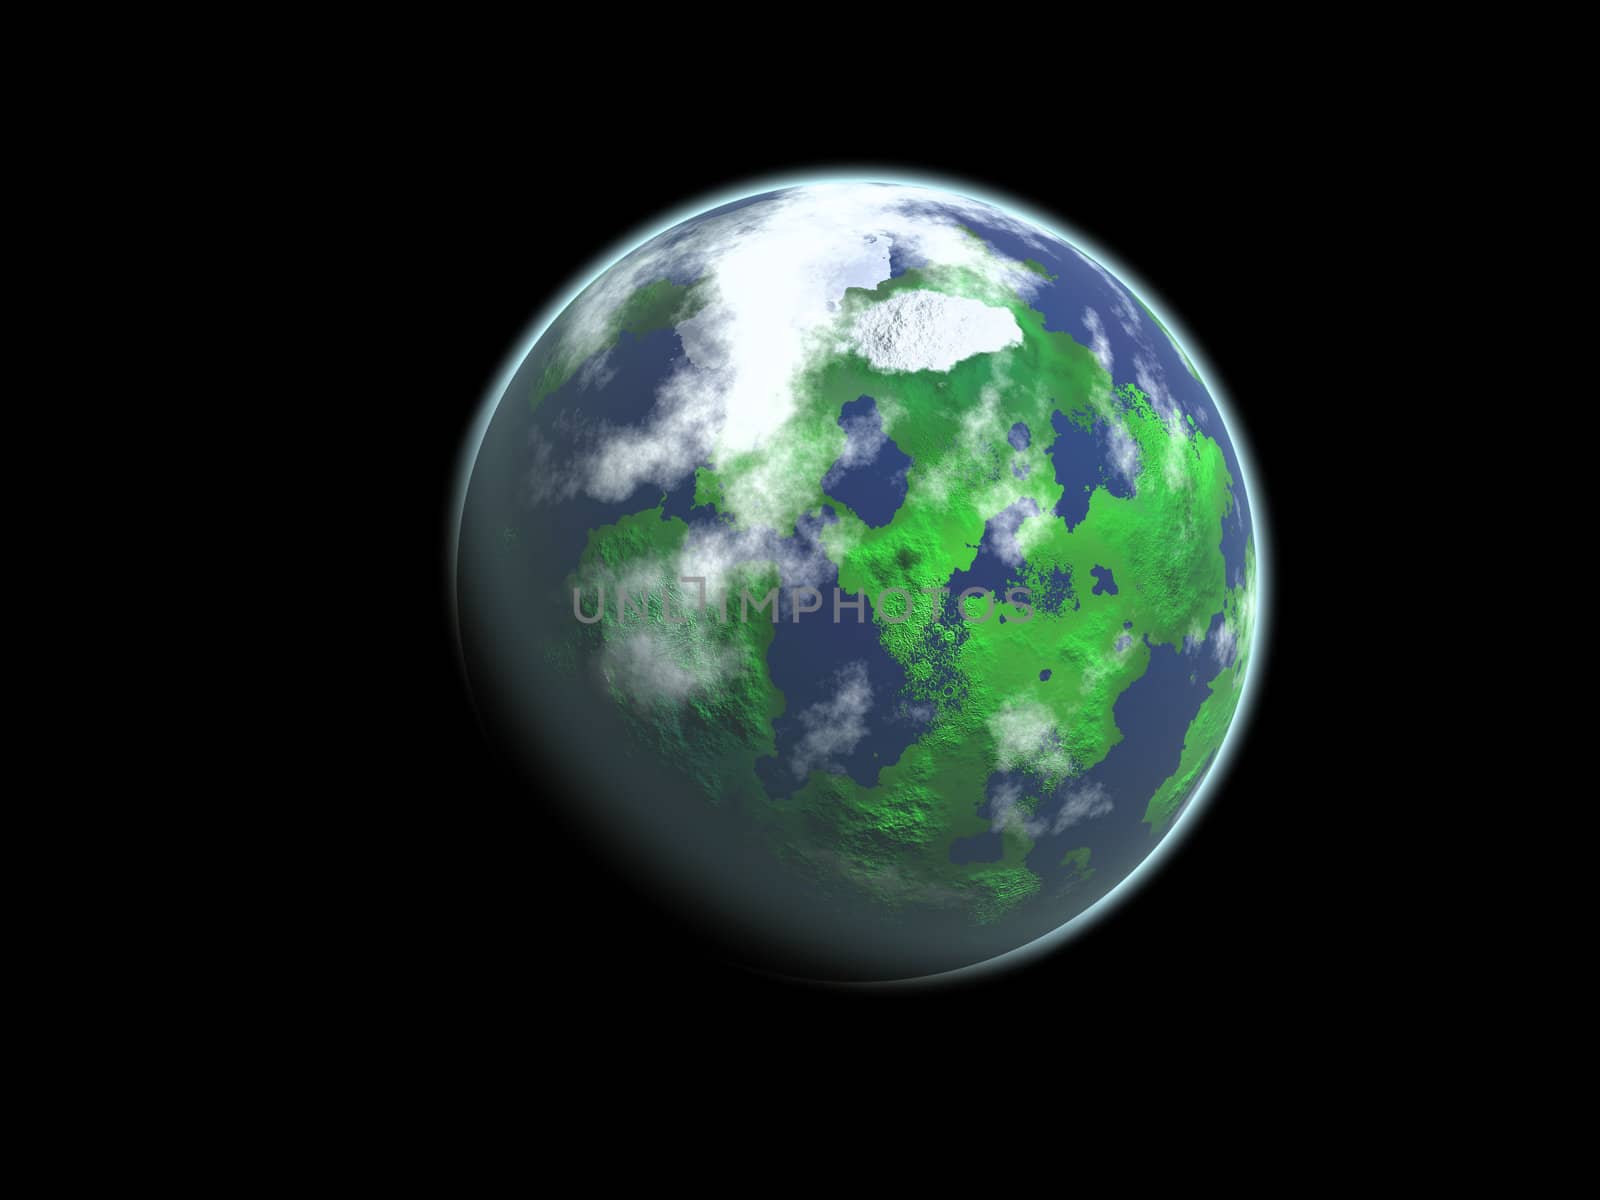 Green planet with clouds, land and water against black background.